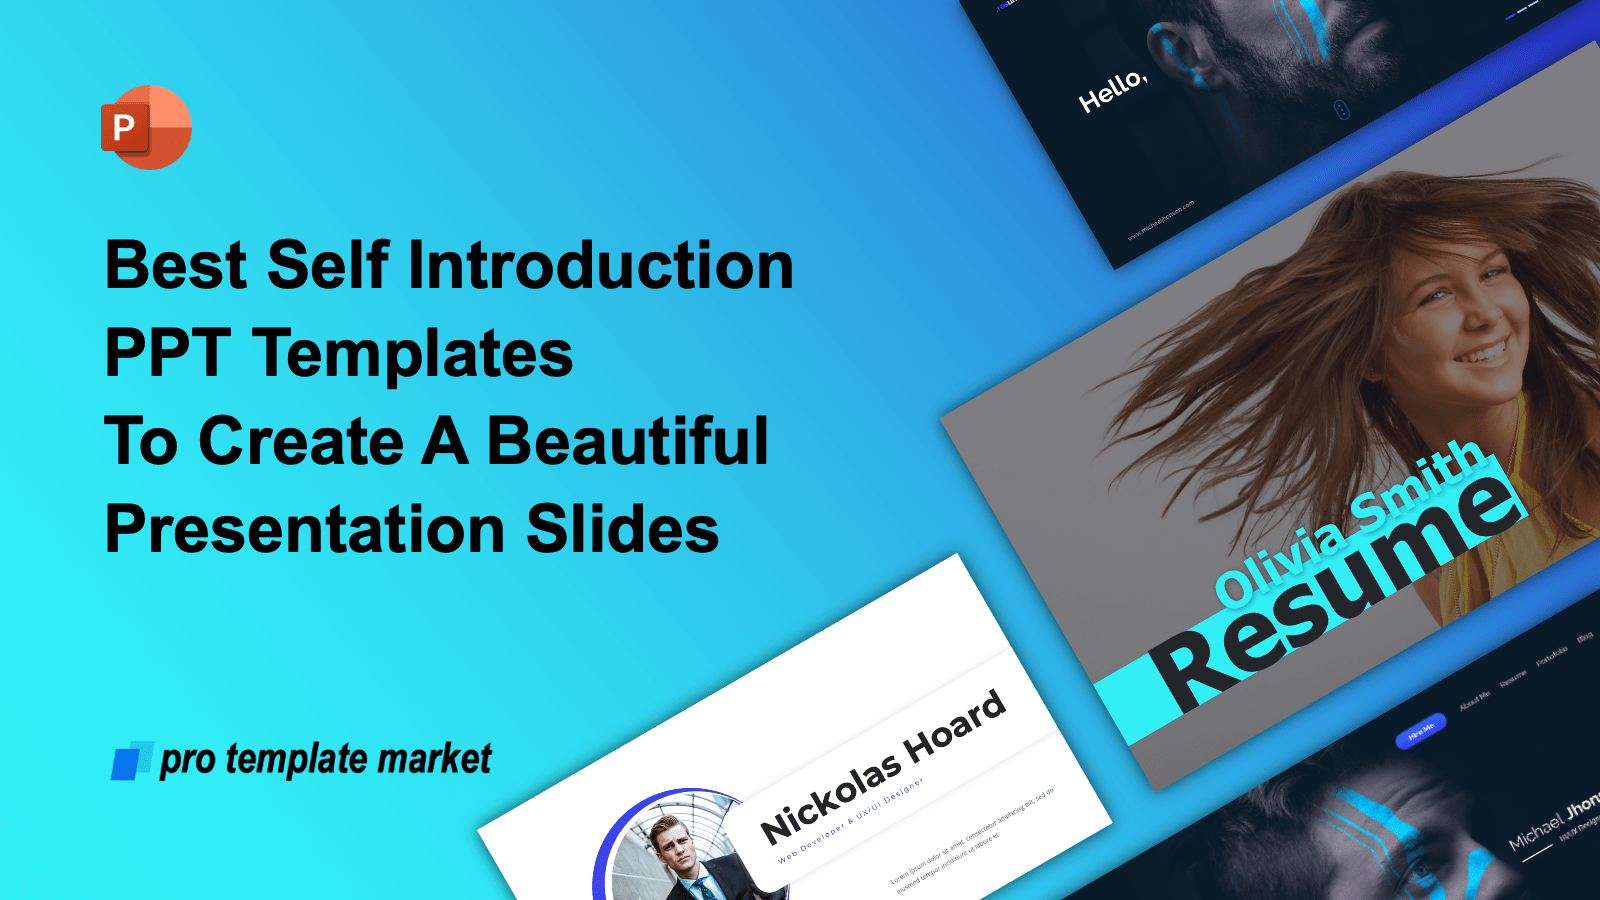 Best Self Introduction PPT Templates